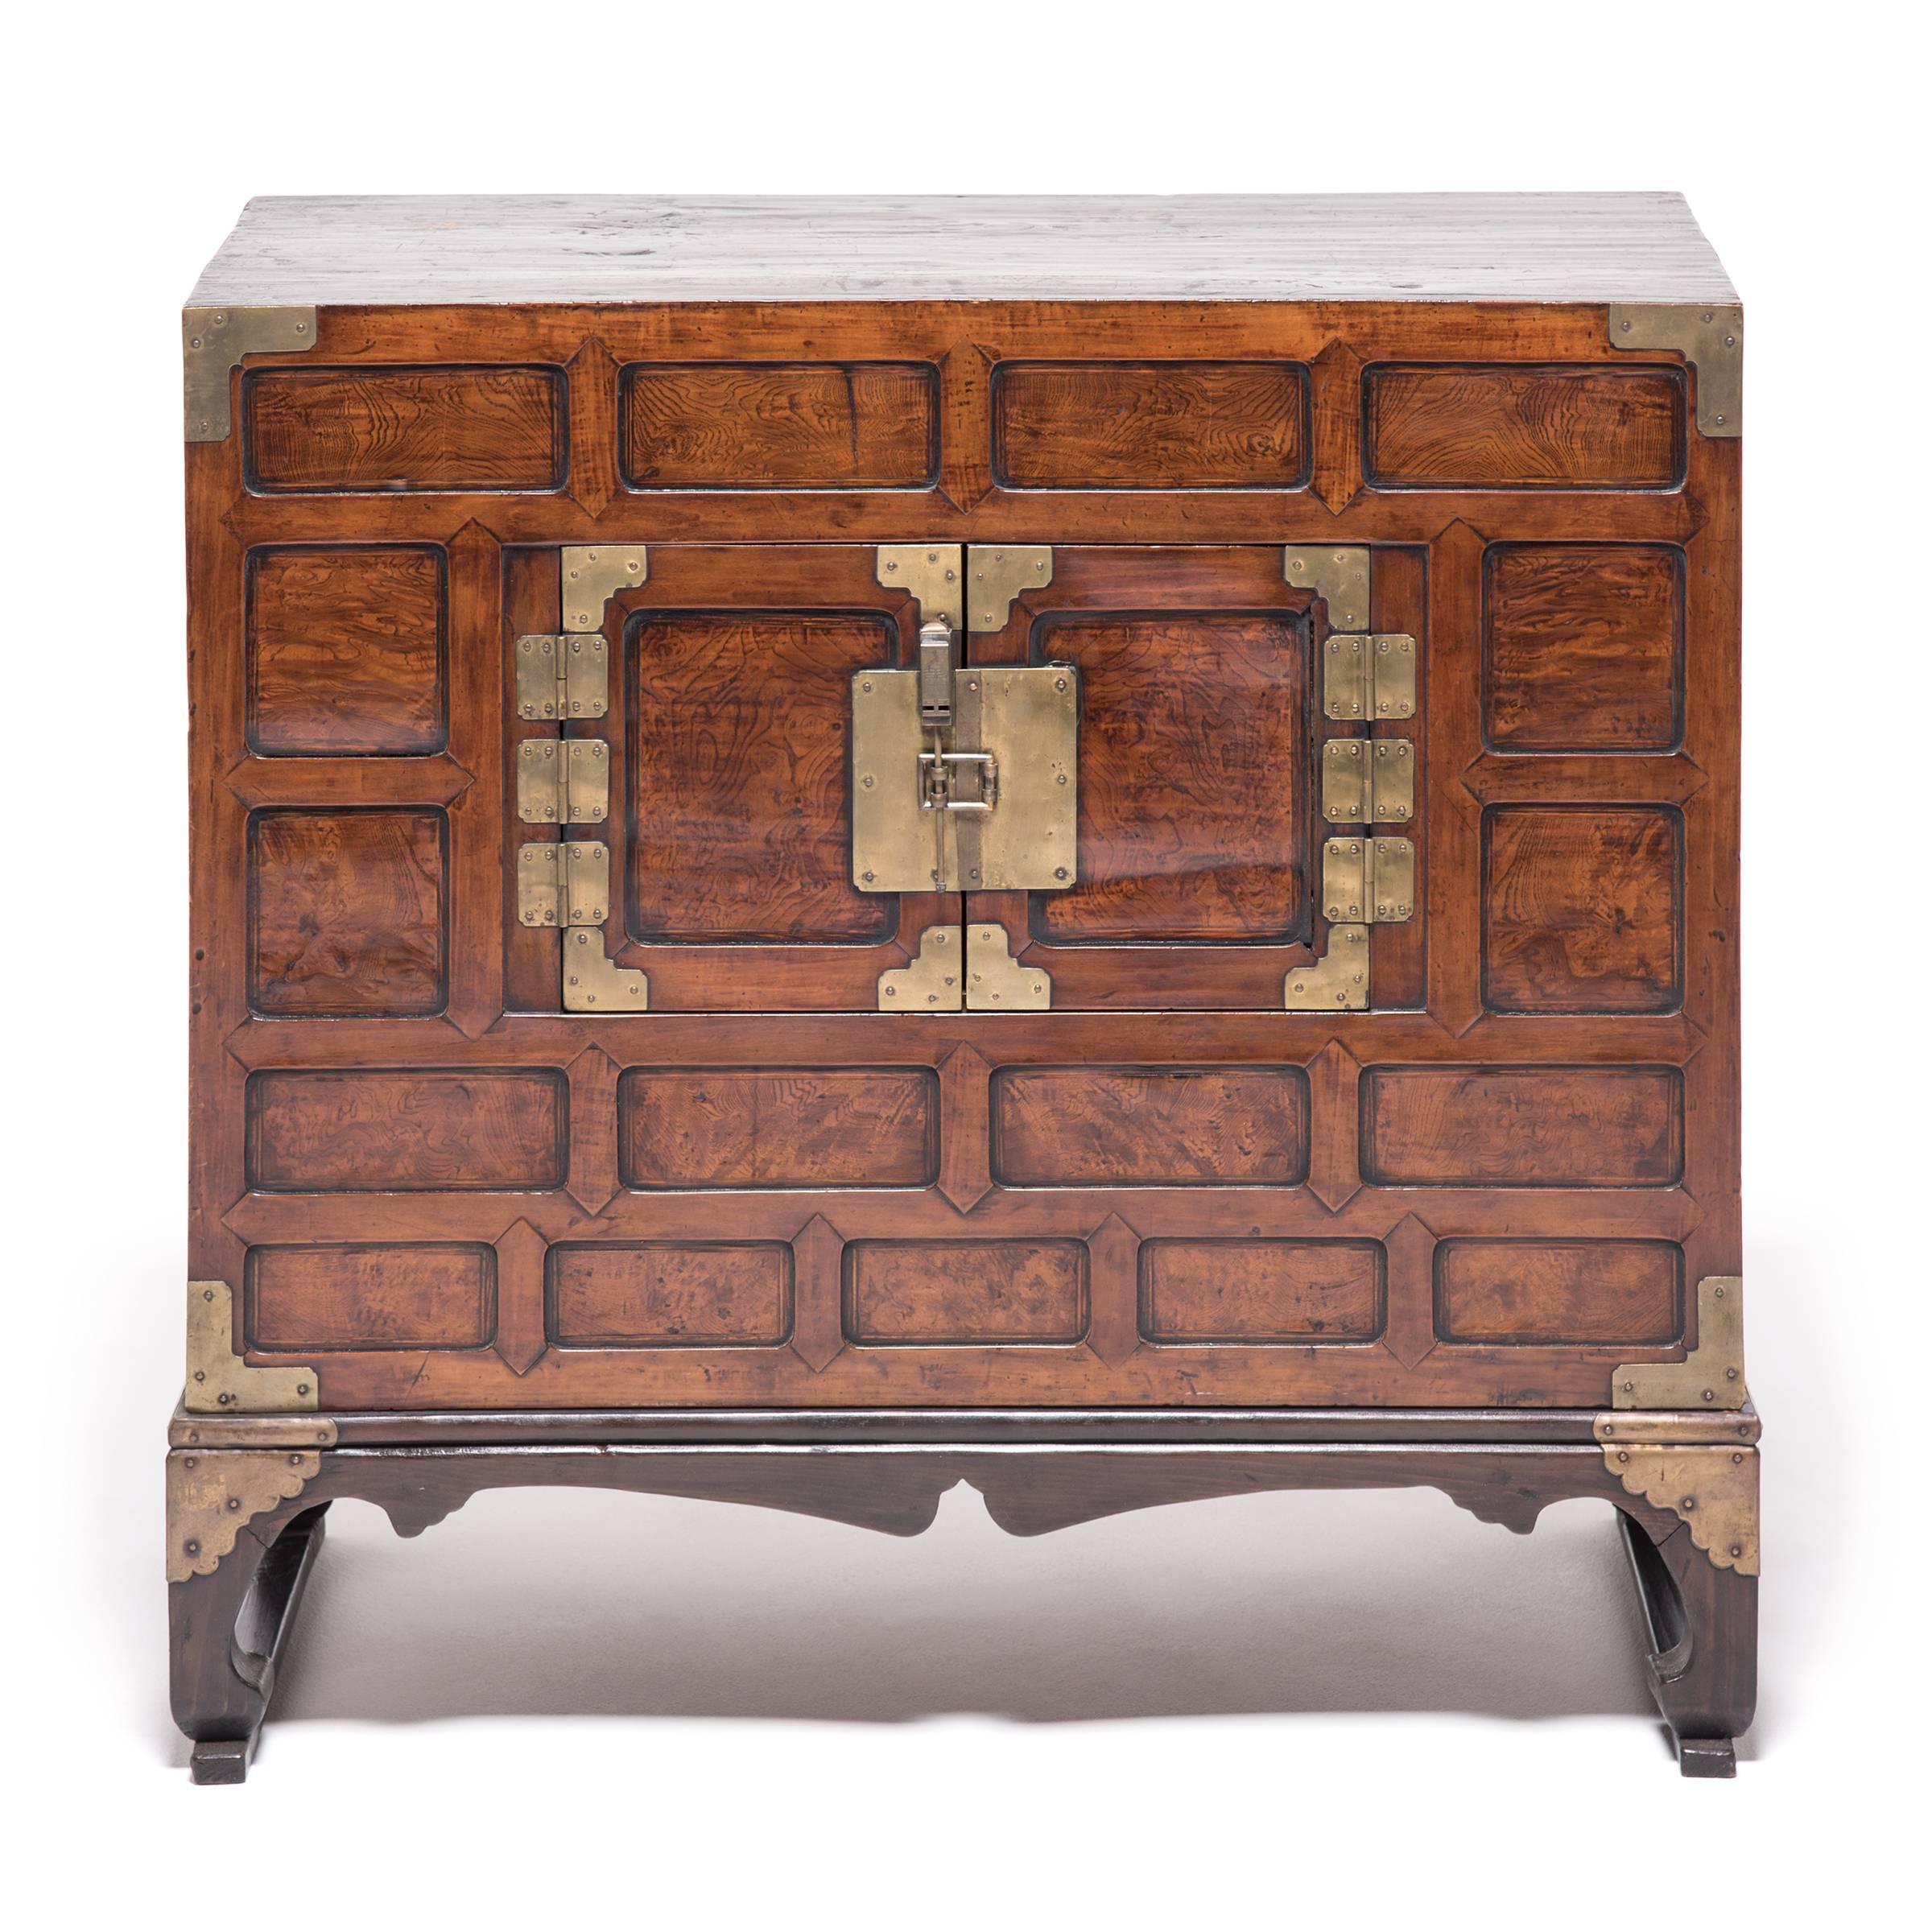 Four types of wood are showcased in this pair of exquisitely crafted Korean chests that date from, circa 1870. United with a coffered design, the cabinets combine paulownia, favoured for its warp-resistant properties; persimmon, for its streaks of